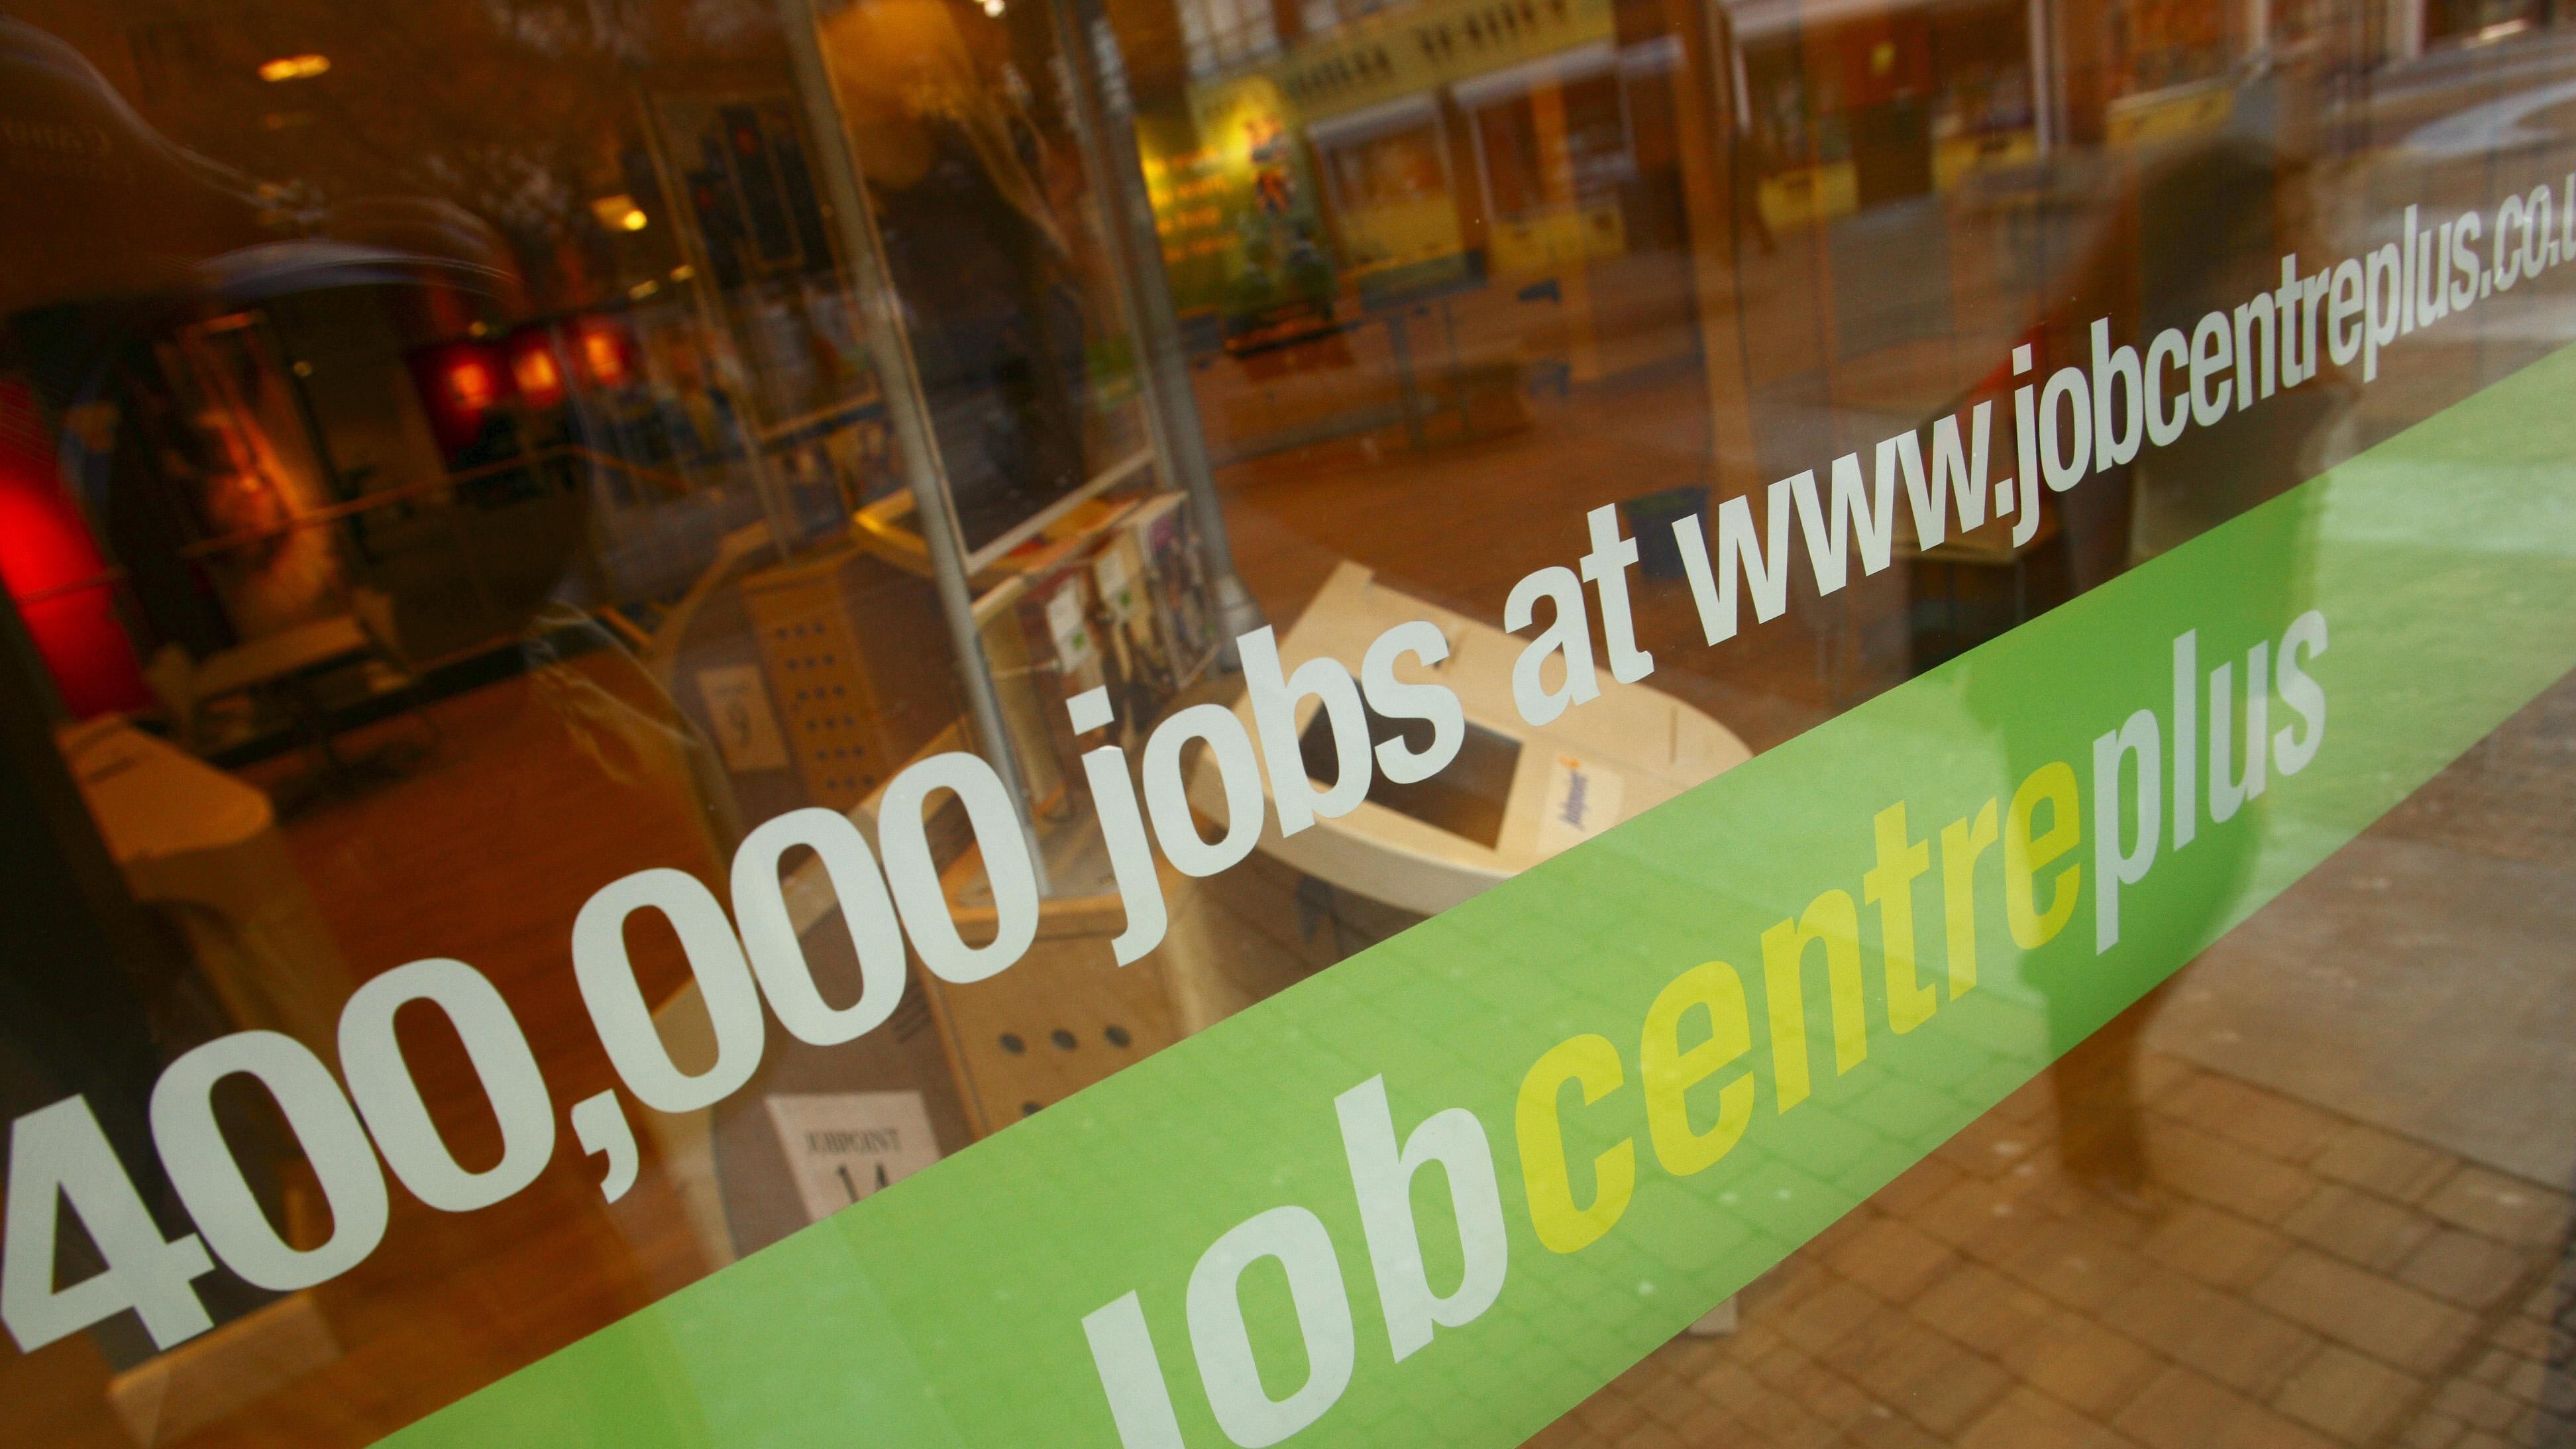 Job vacancies dropped sharply, down 12,000 to 904,000 in the three months to May